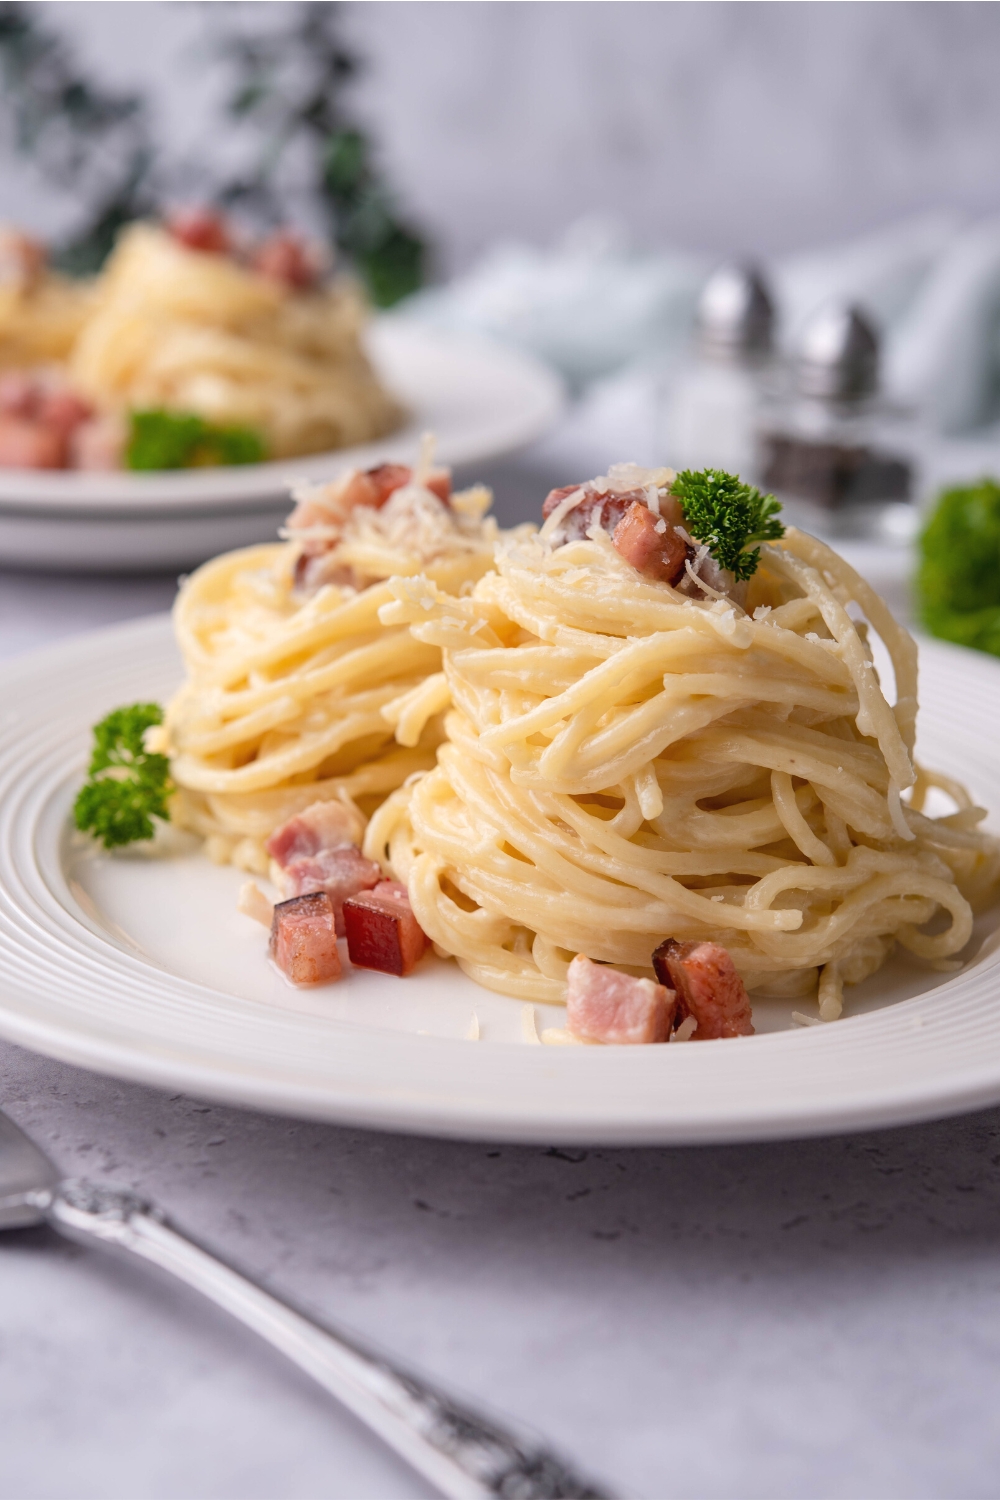 A bundle of spaghetti noodles with some diced pancetta on a white plate.